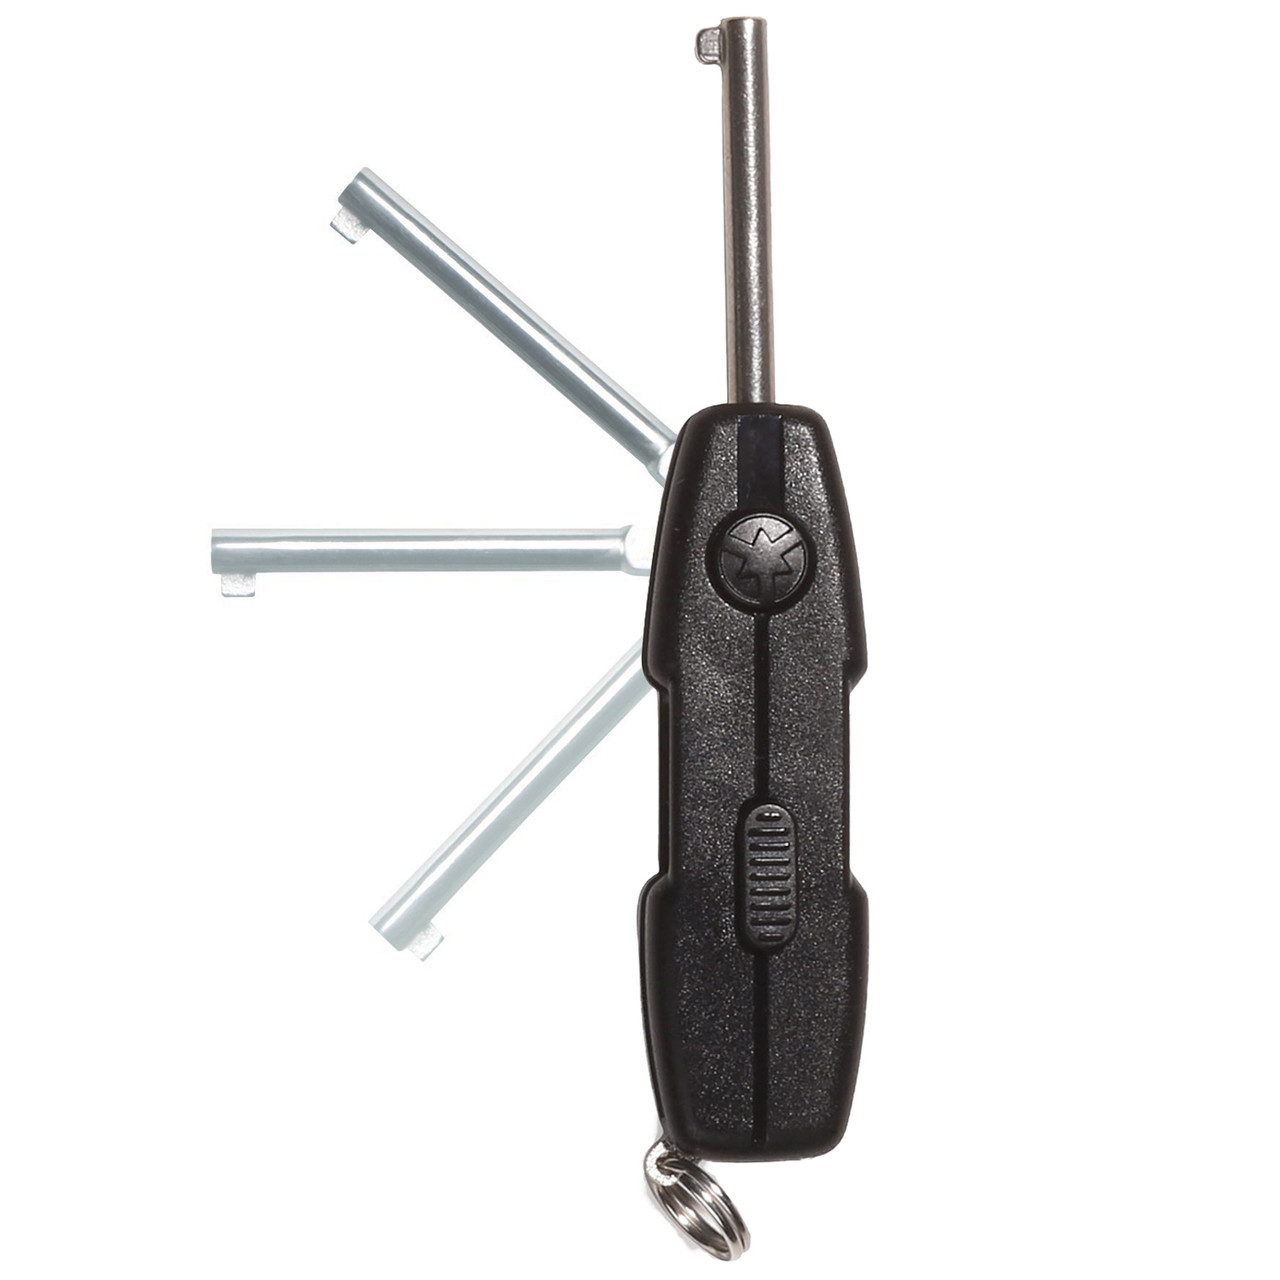 Asp Autokey Handcuff Key Traditional handcuff keys are short and often  difficult to use. Extended keys are hard to carry. Their double lock pin  and pawl release catch on equipment and snag